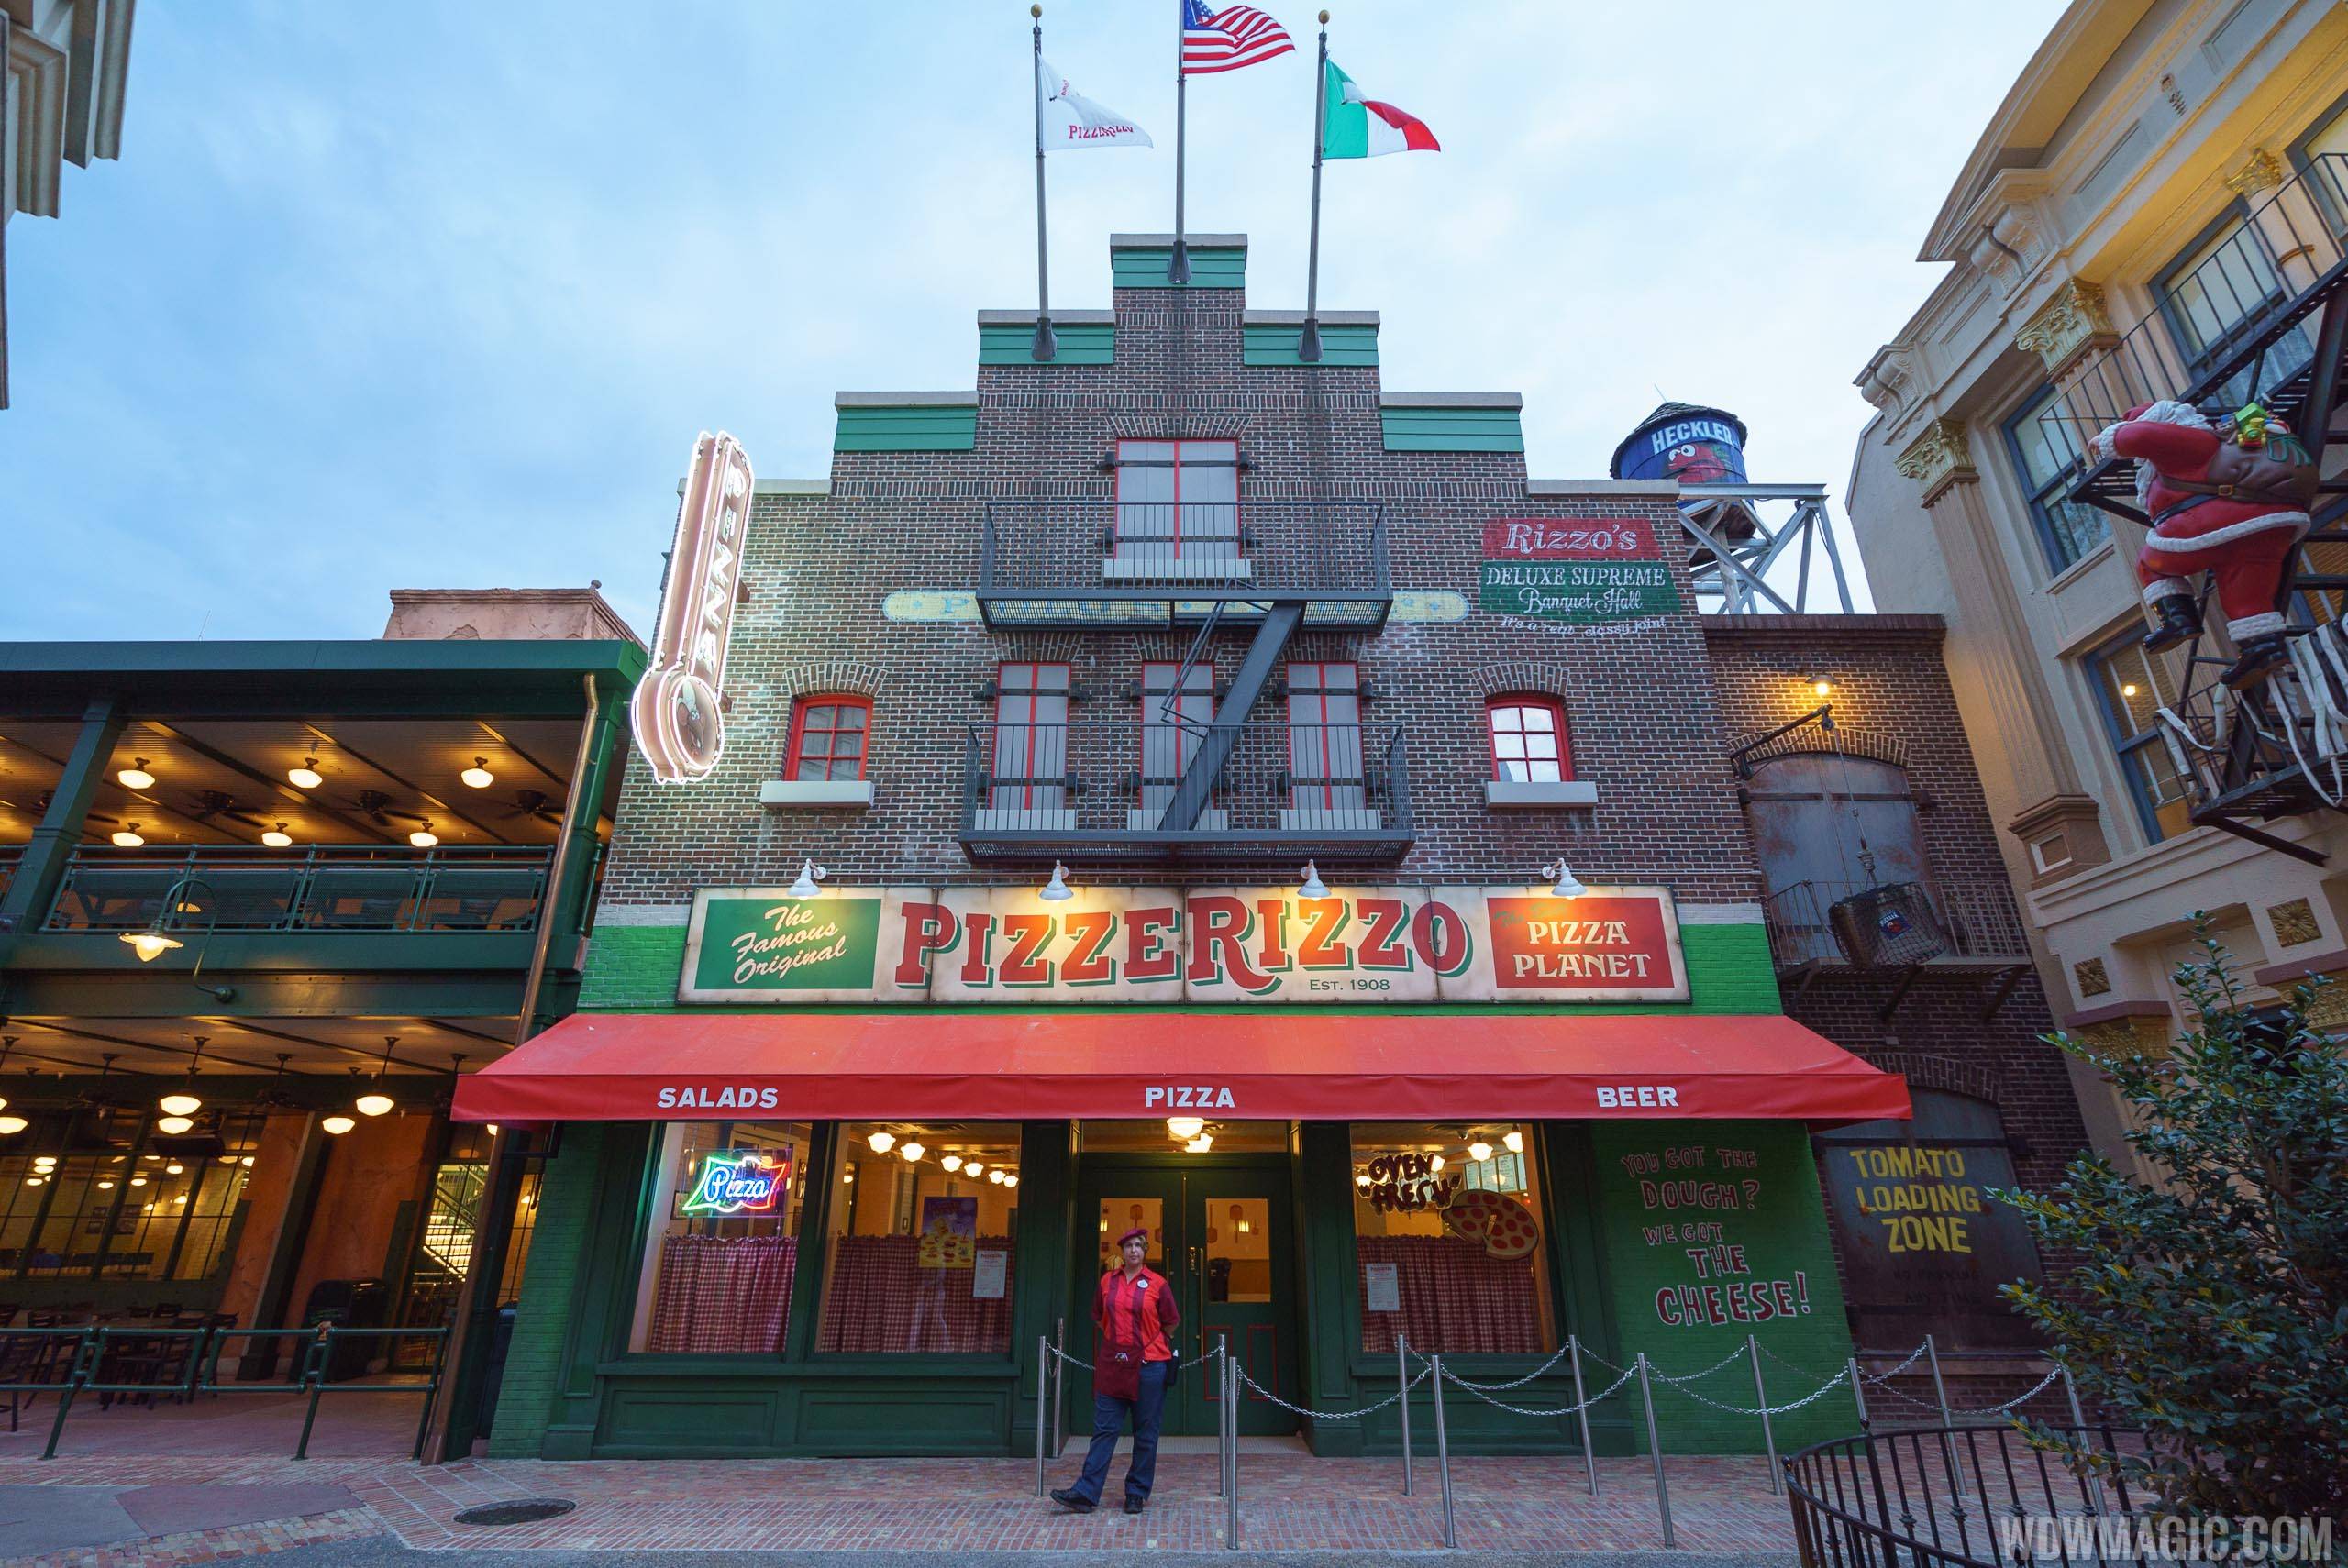 Pizze Rizzo will be one of the restaurants to reopen on July 15